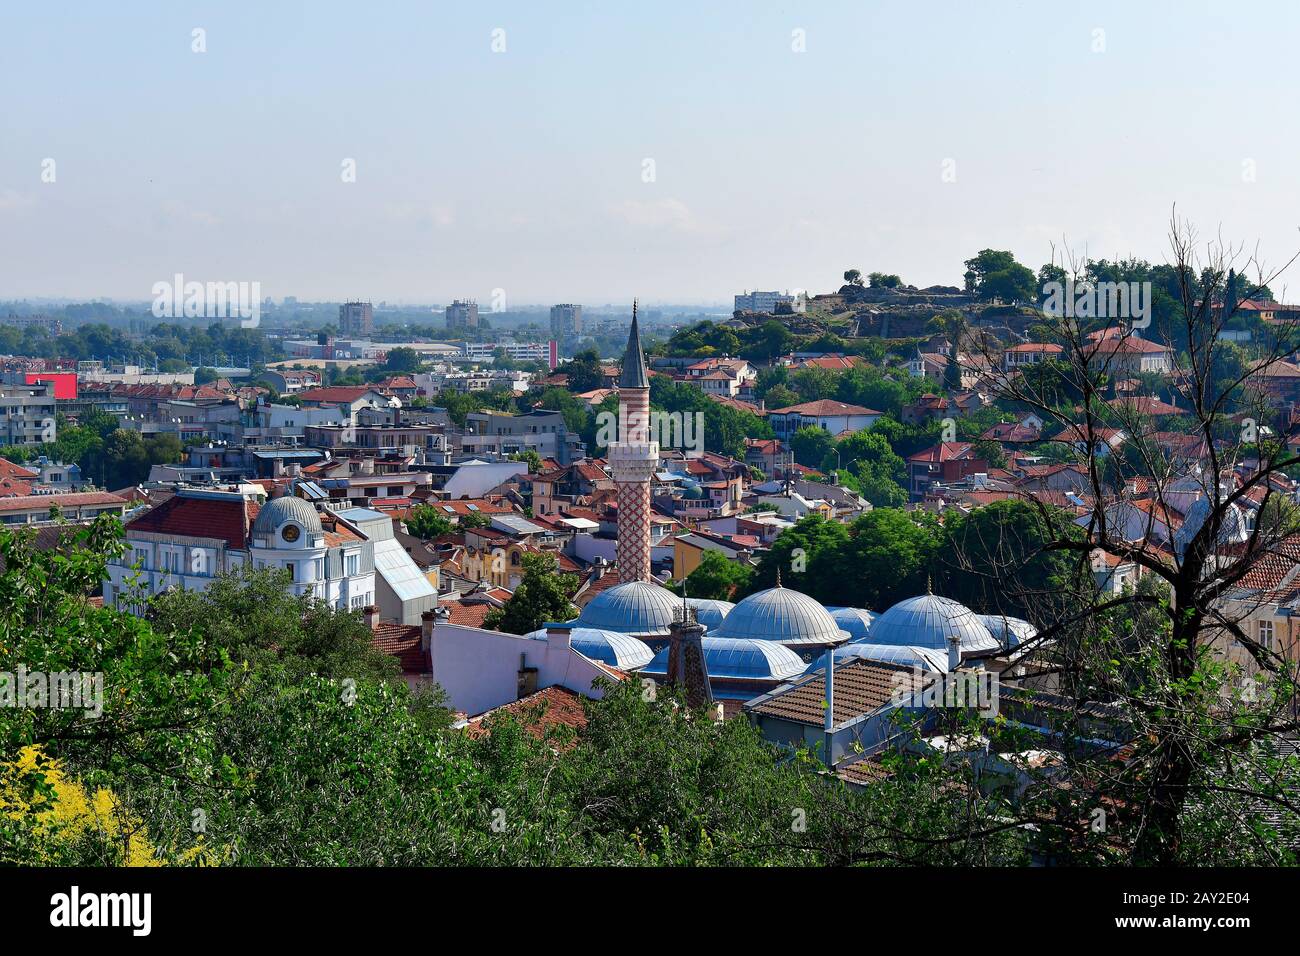 Bulgaria, Plovdiv, cityview with Minaret of Dzhumaja Mosque, buildings and old citadel on Nebet hill, city become European Capital of Culture 2019 Stock Photo